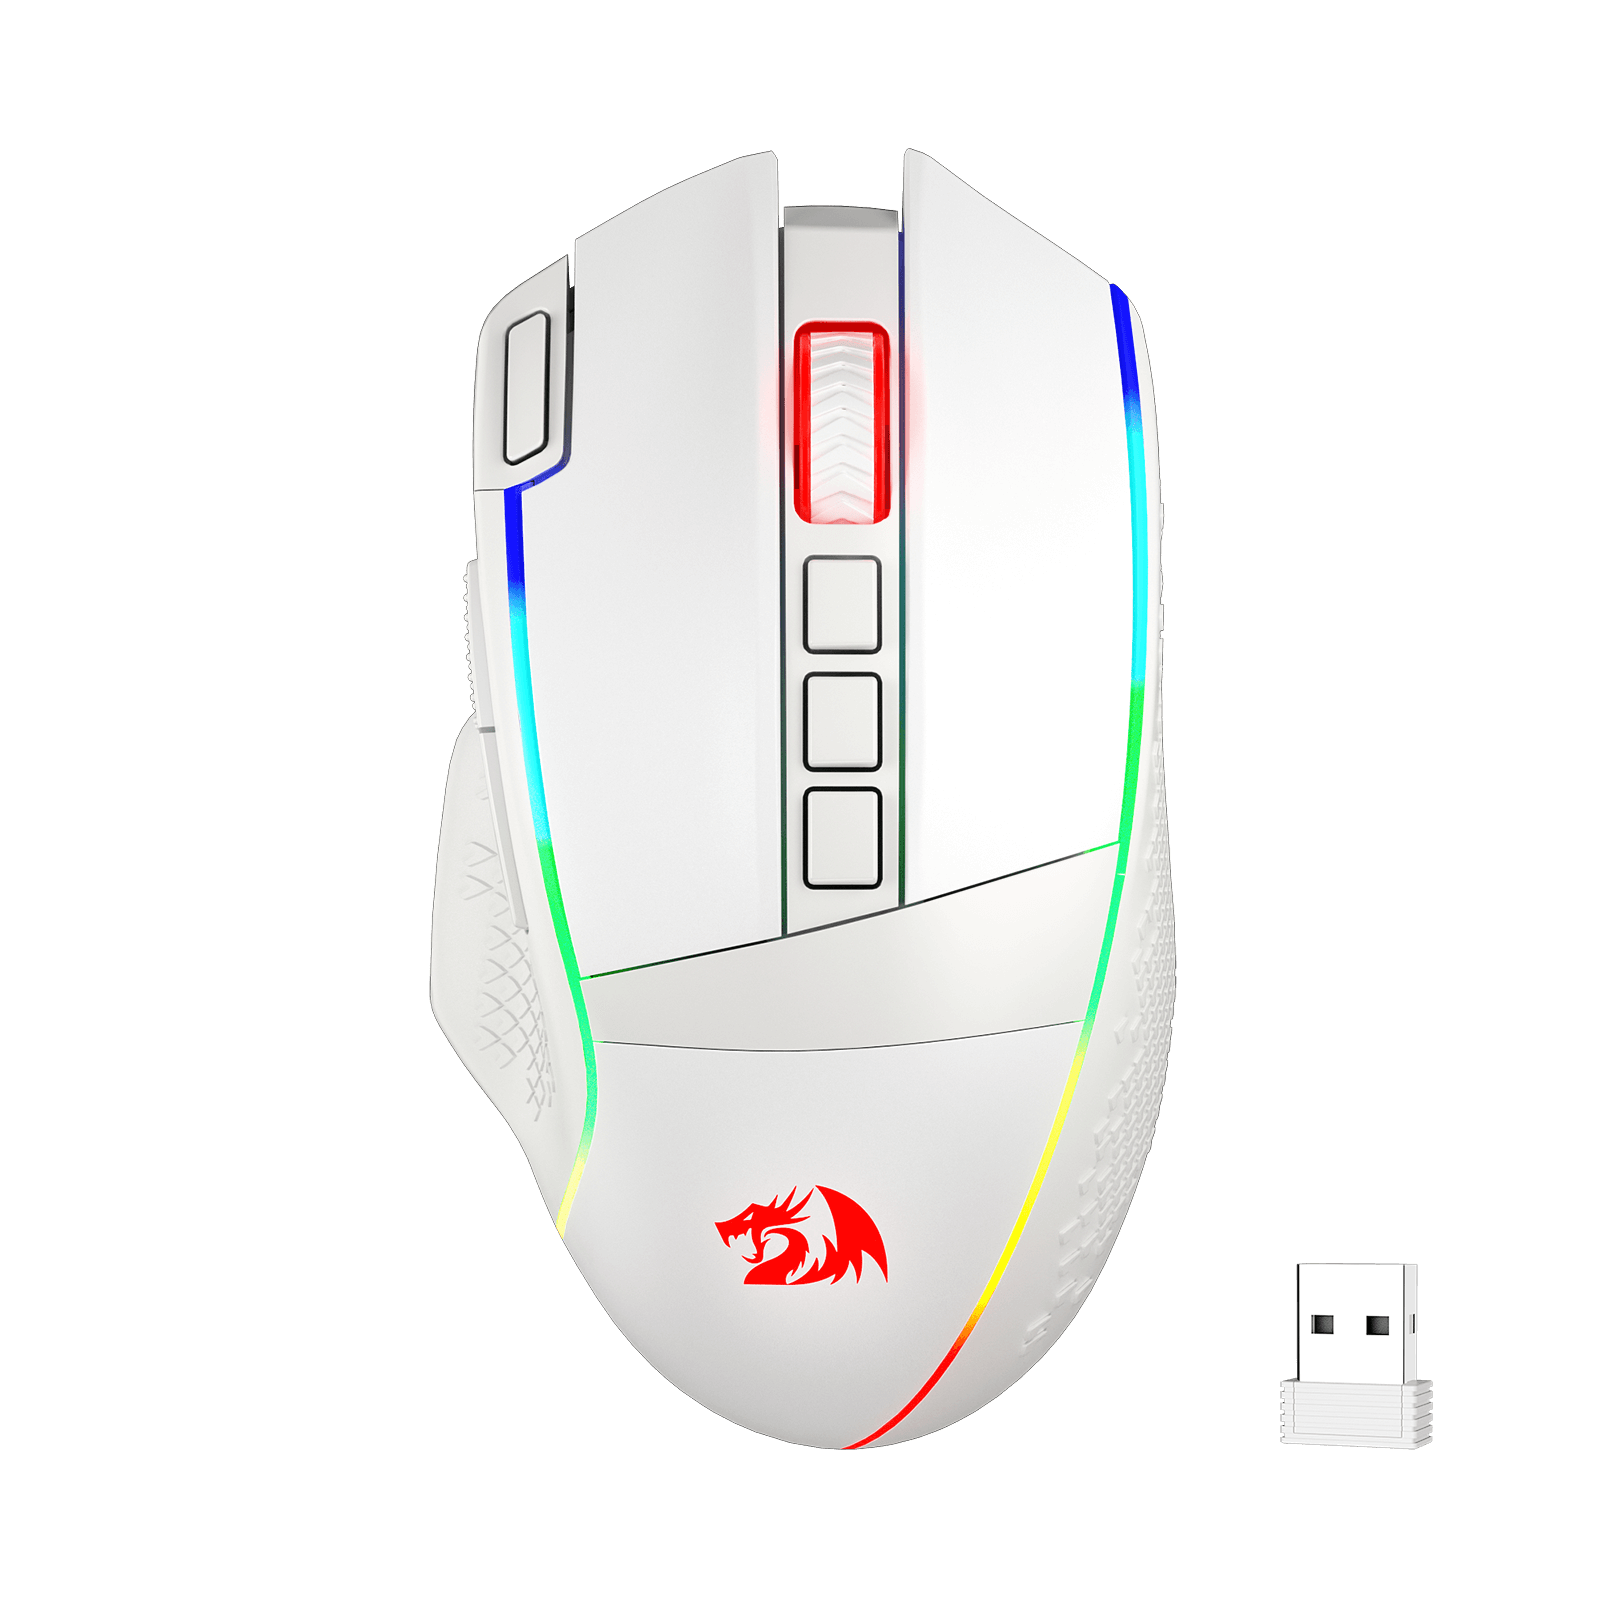 Redragon M991 Wireless Gaming Mouse | show